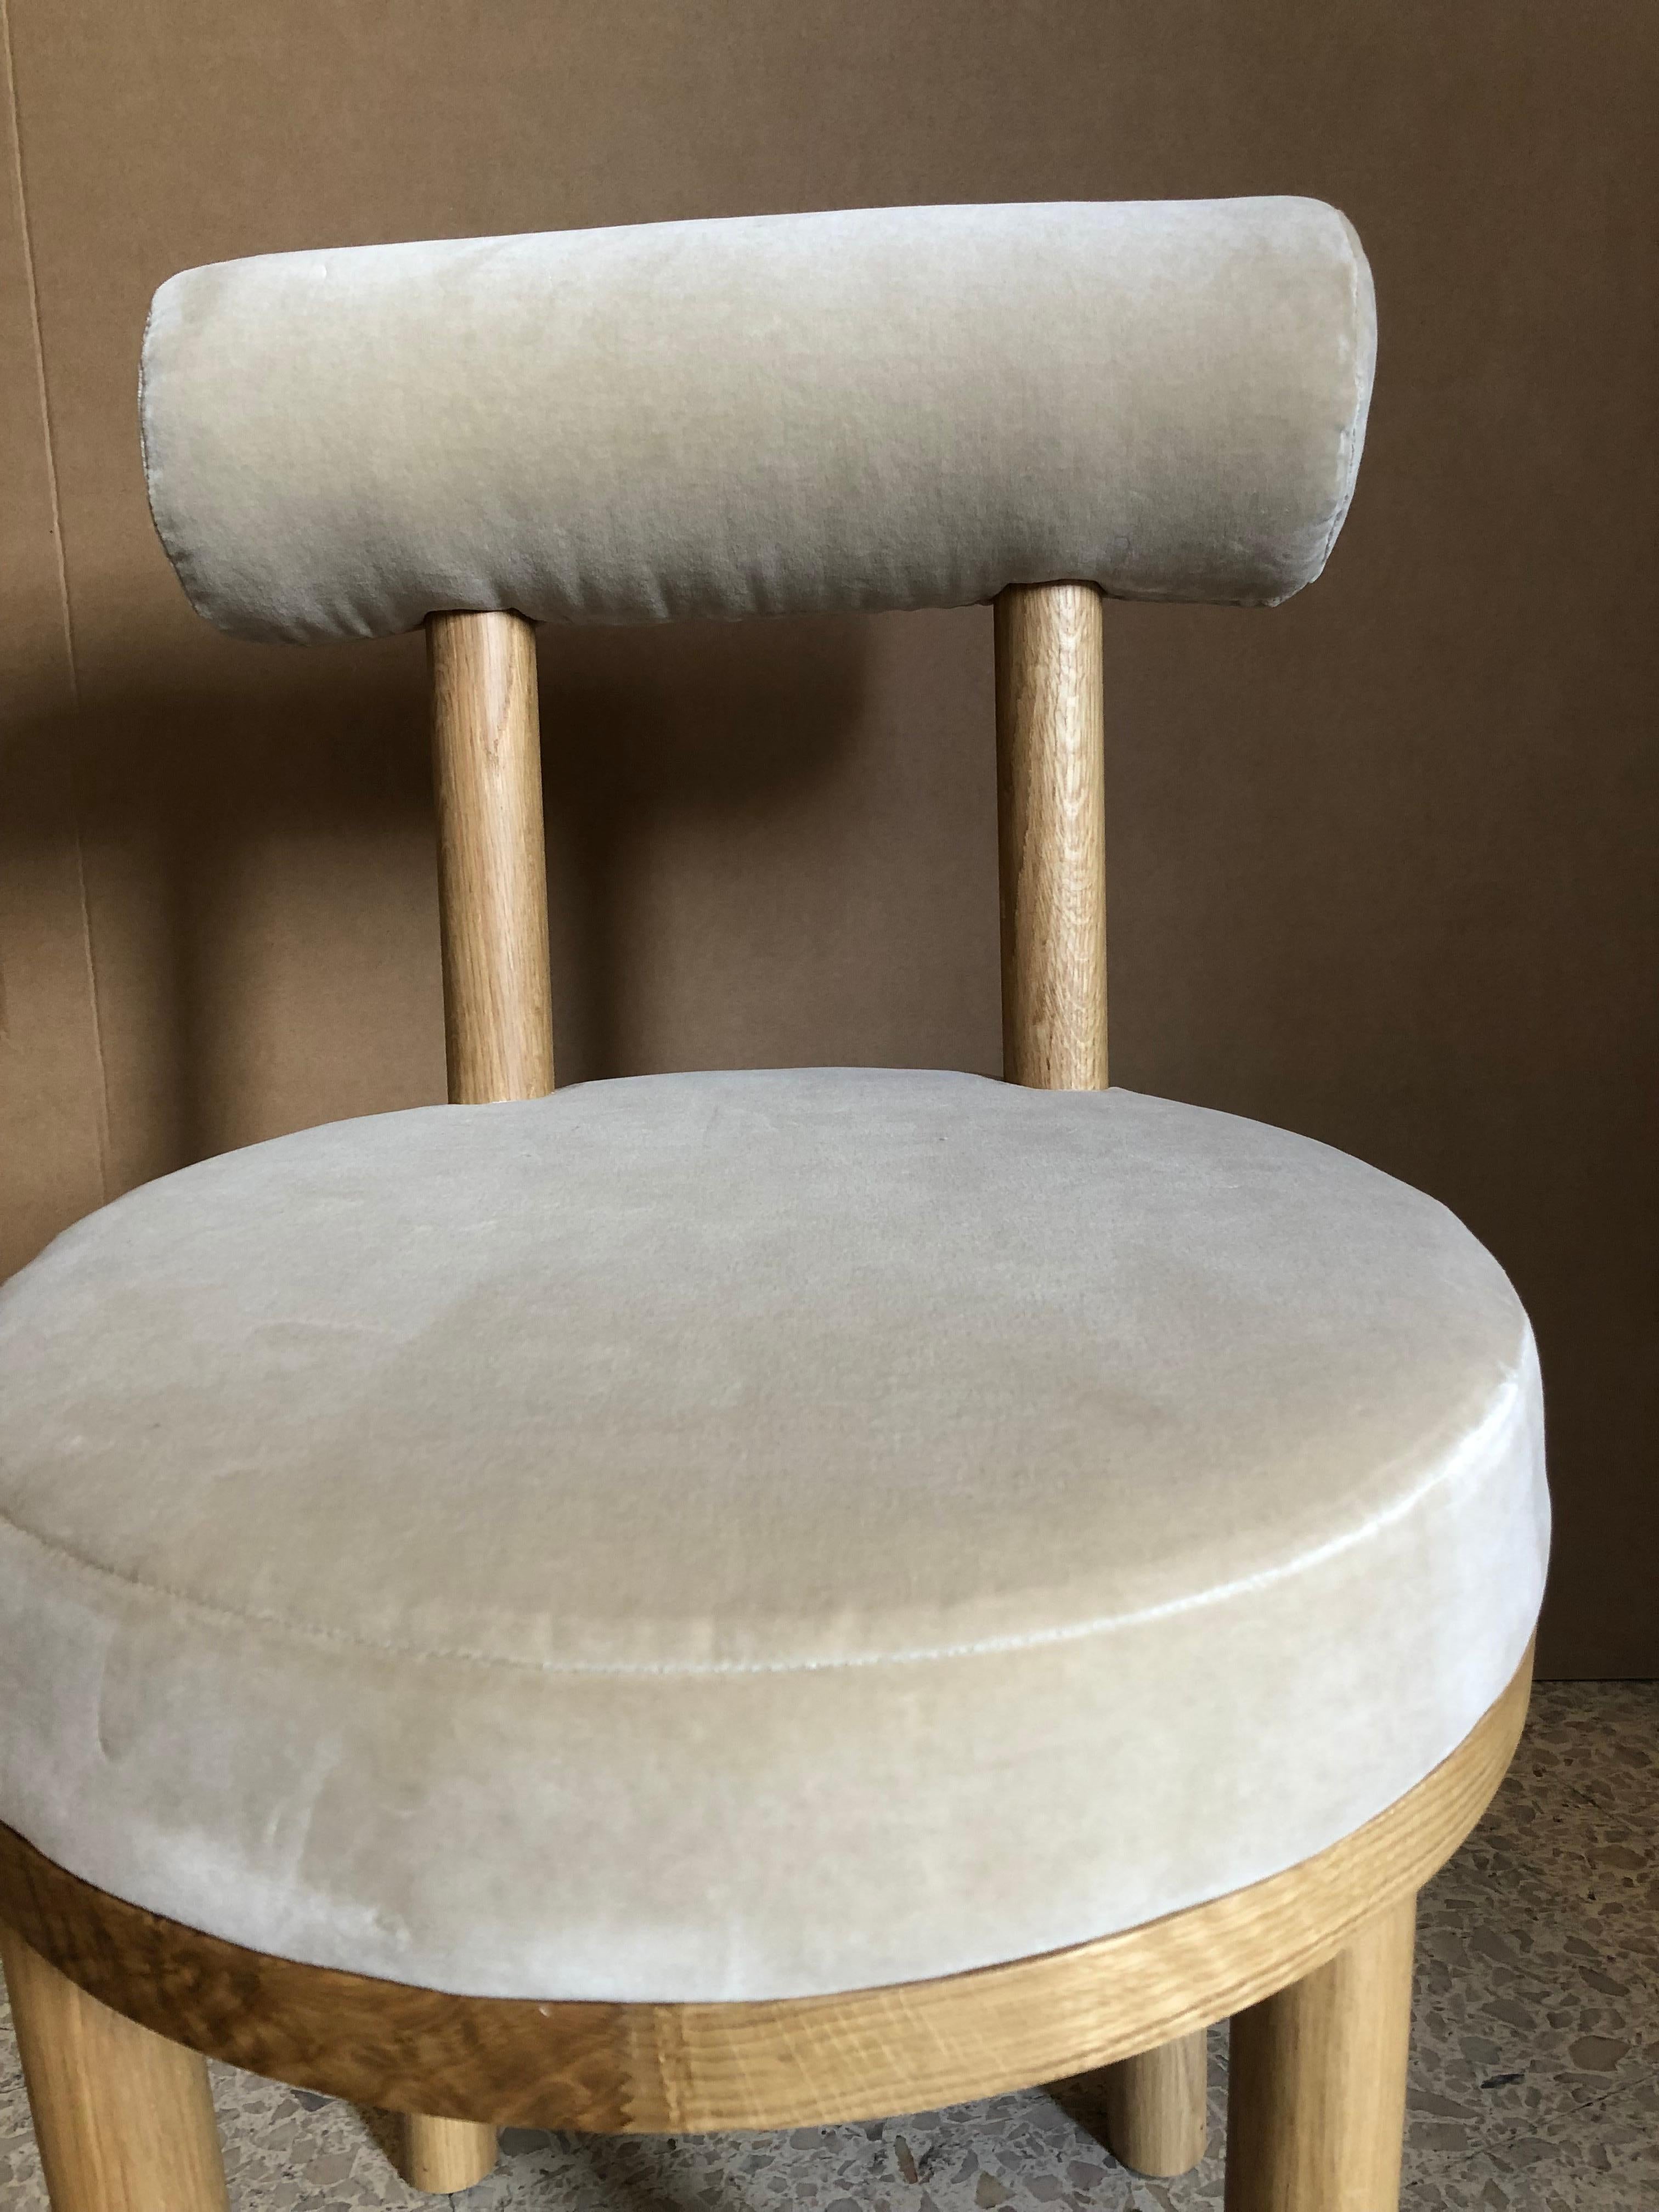 Contemporary Modern Moca Chair in Oak & Beige Velvet Fabric  by Studio Rig for Collector Studio
 
A chair that mixes both modern and classical design approaches.
Designed to hug the body, durable and solid chair features a body structure produced in